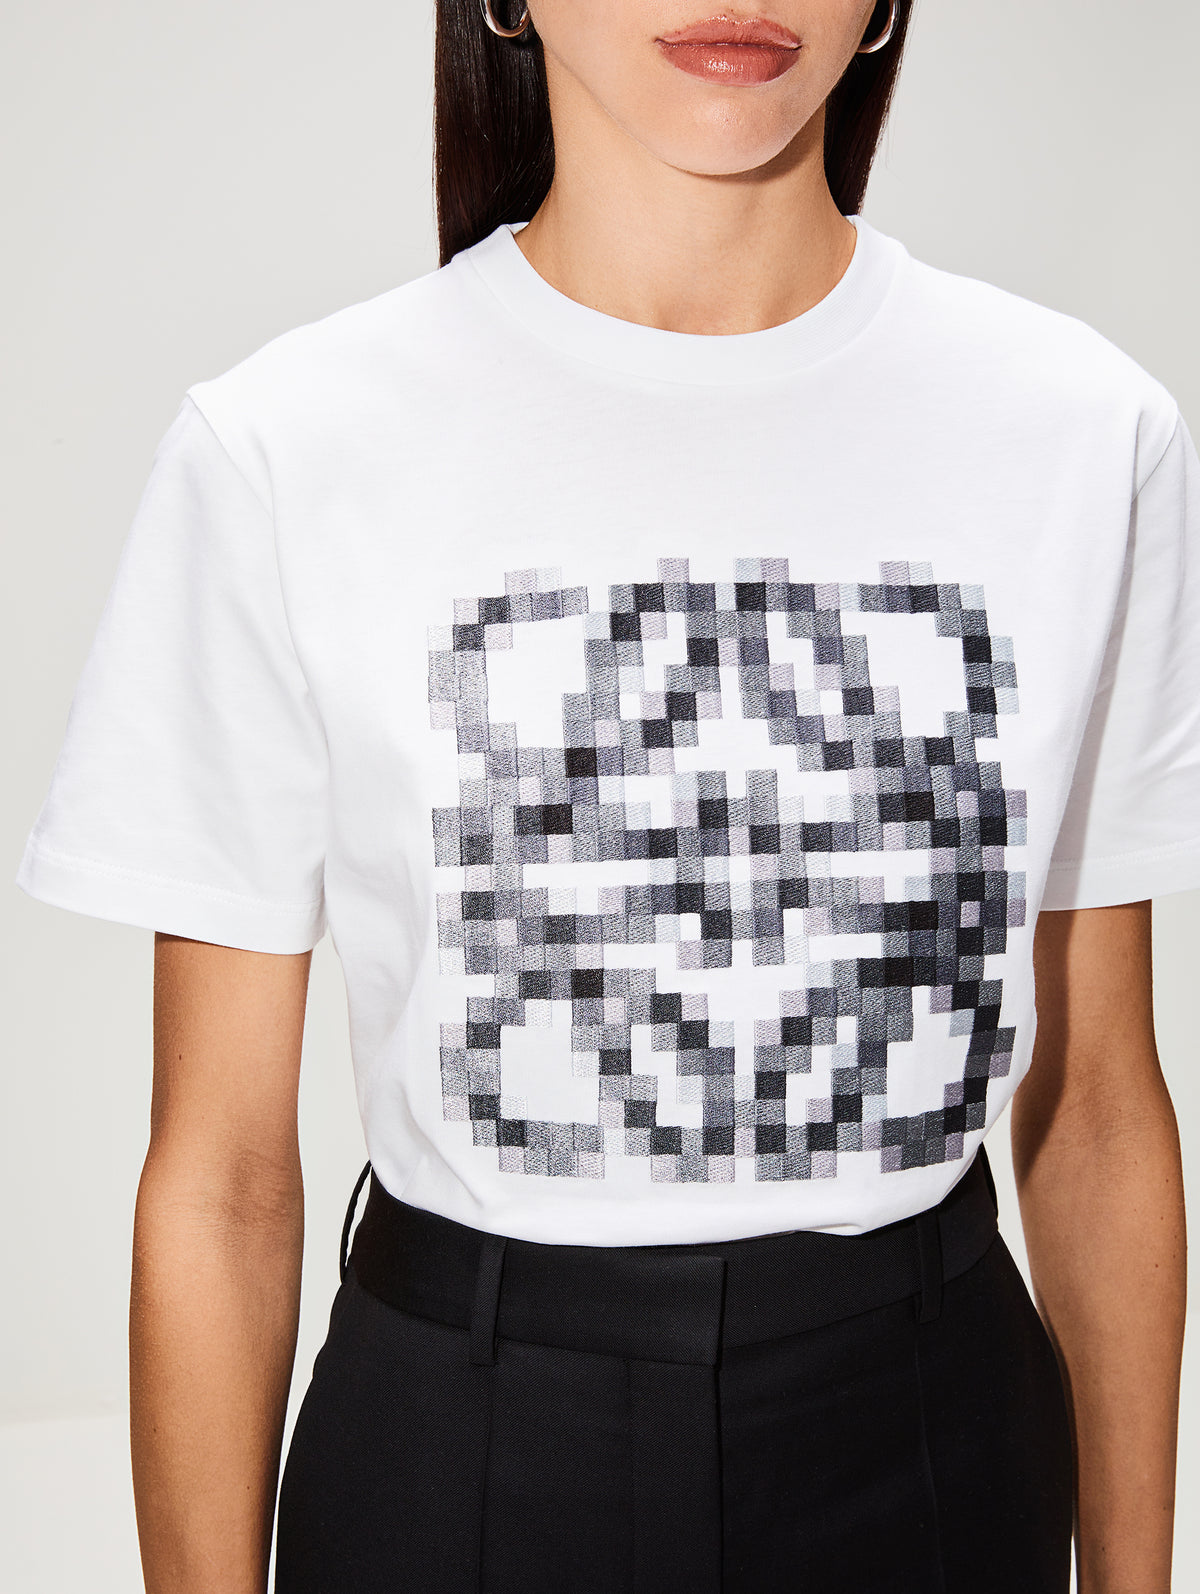 Shirt for : Highly Pixelated Guest